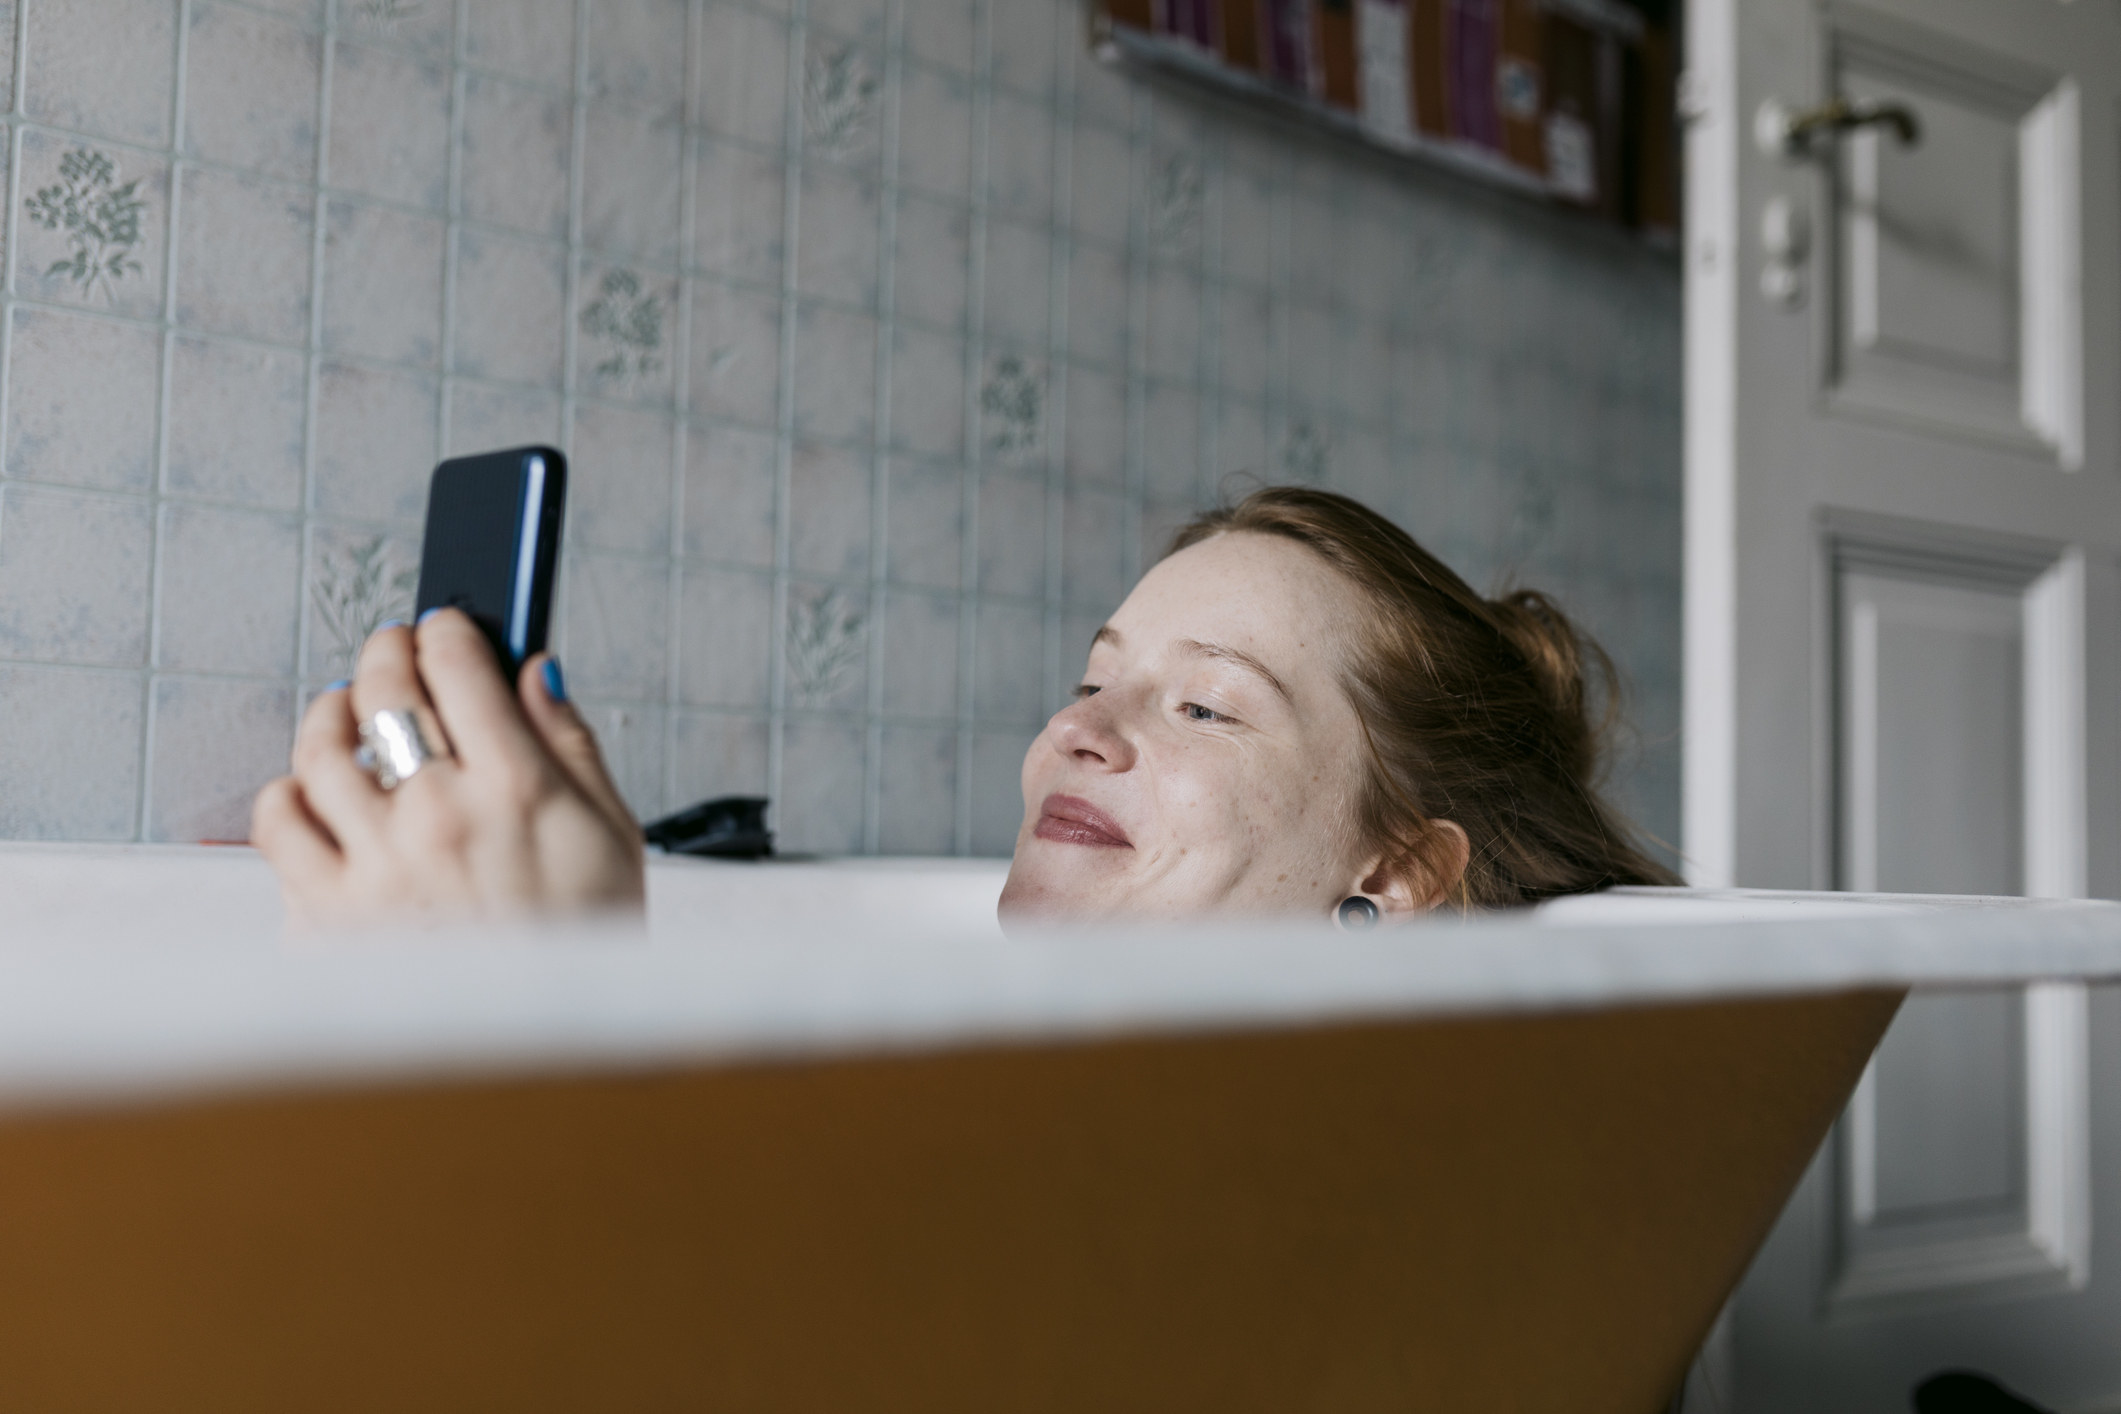 Someone relaxes in a tub while watching something on their phone